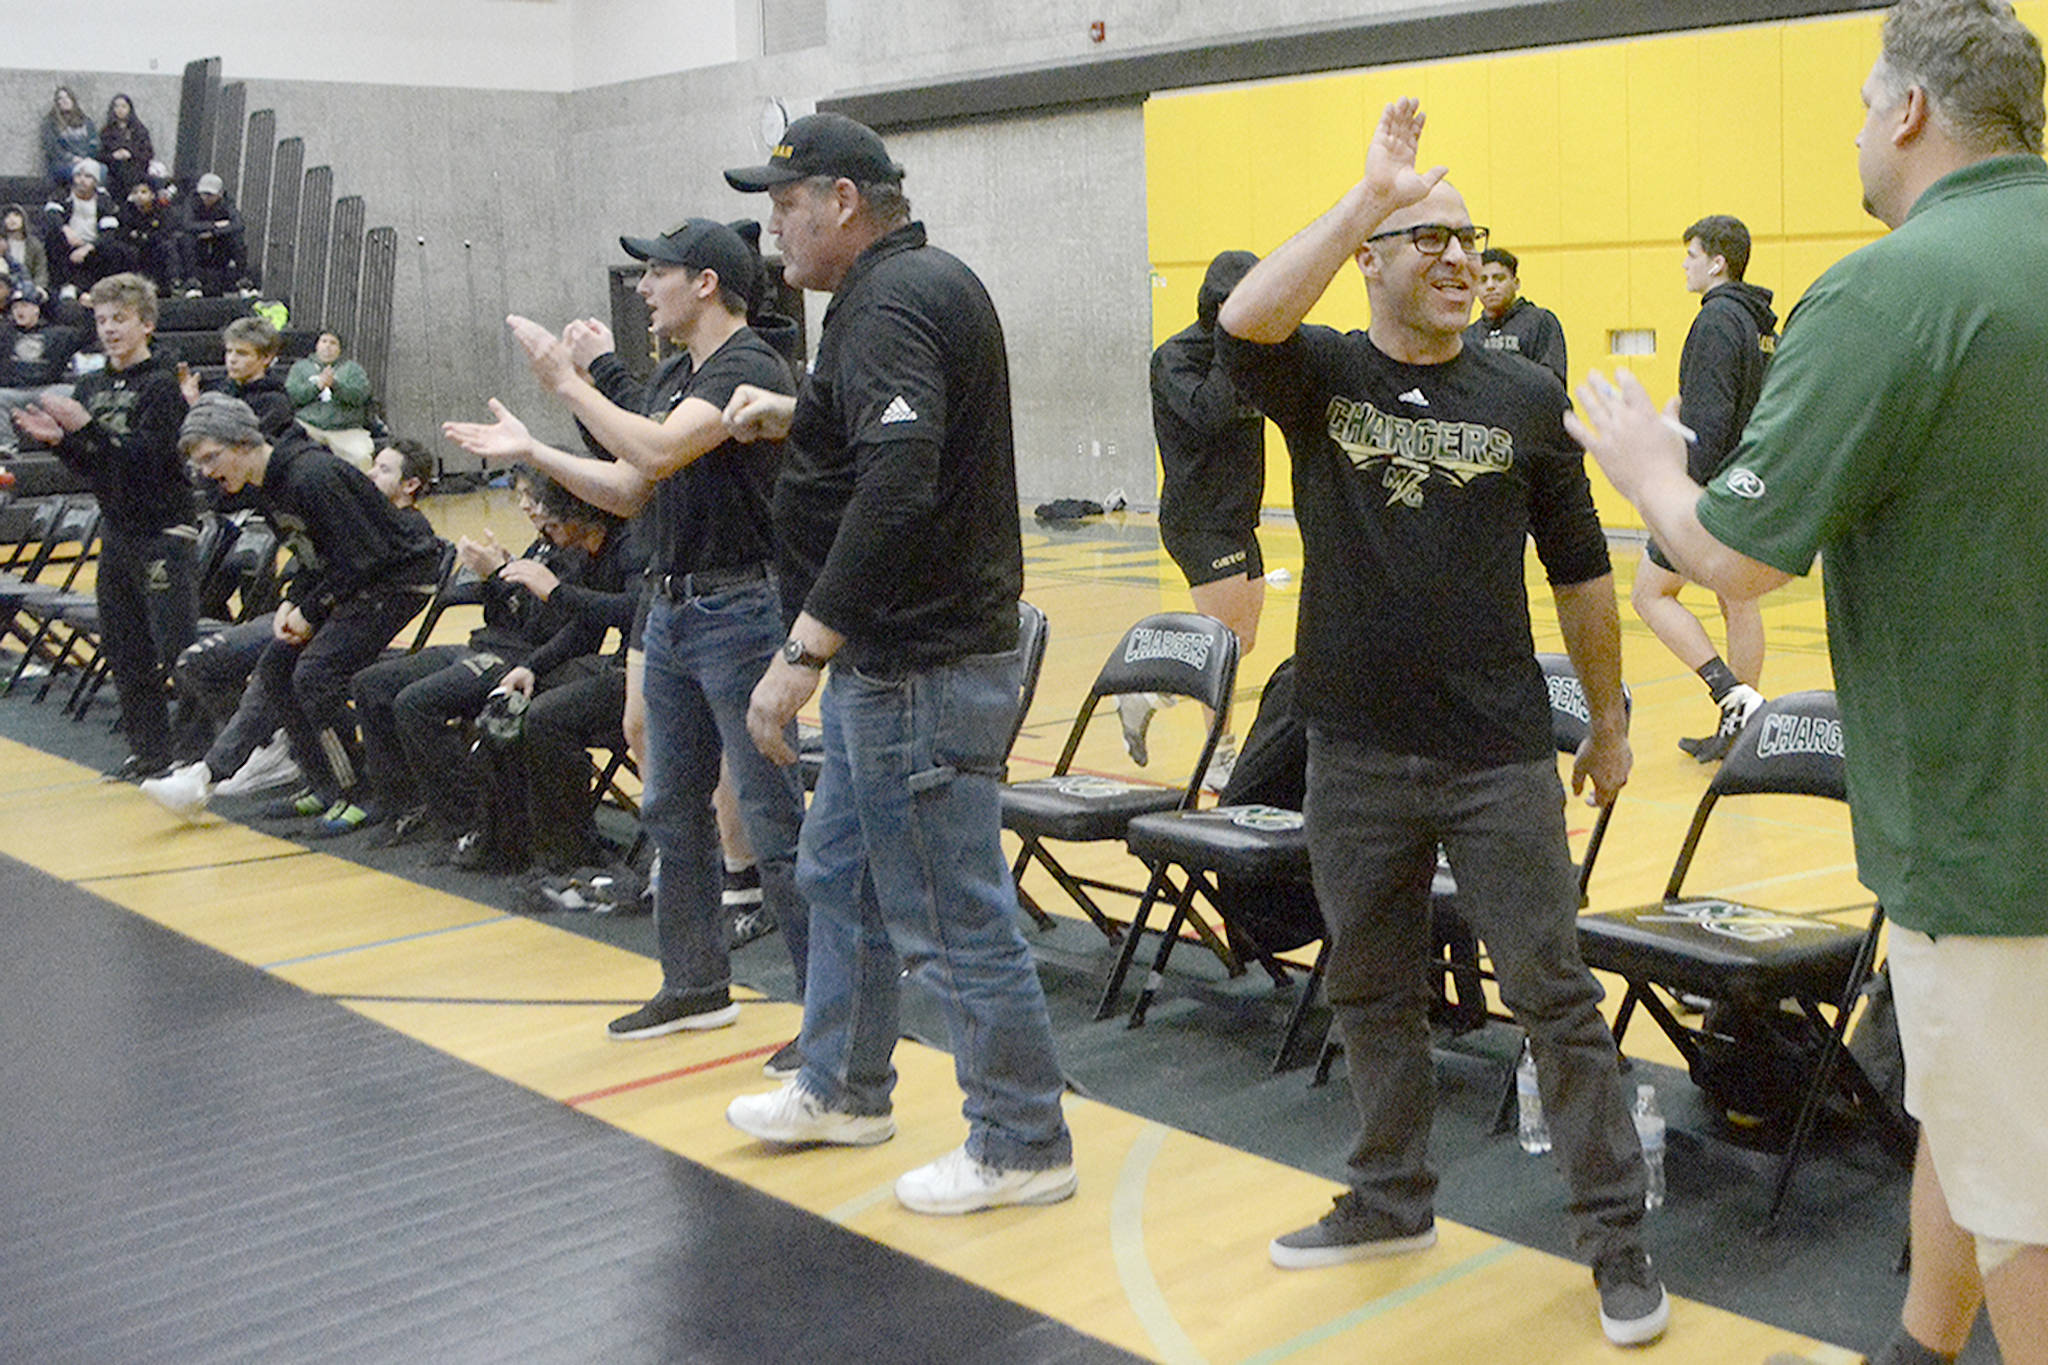 MG coach John Deaver has enough high 5’s to go all around after the Chargers beat M-P for the first time ever in wrestling. (Steve Powell/Staff Photos)